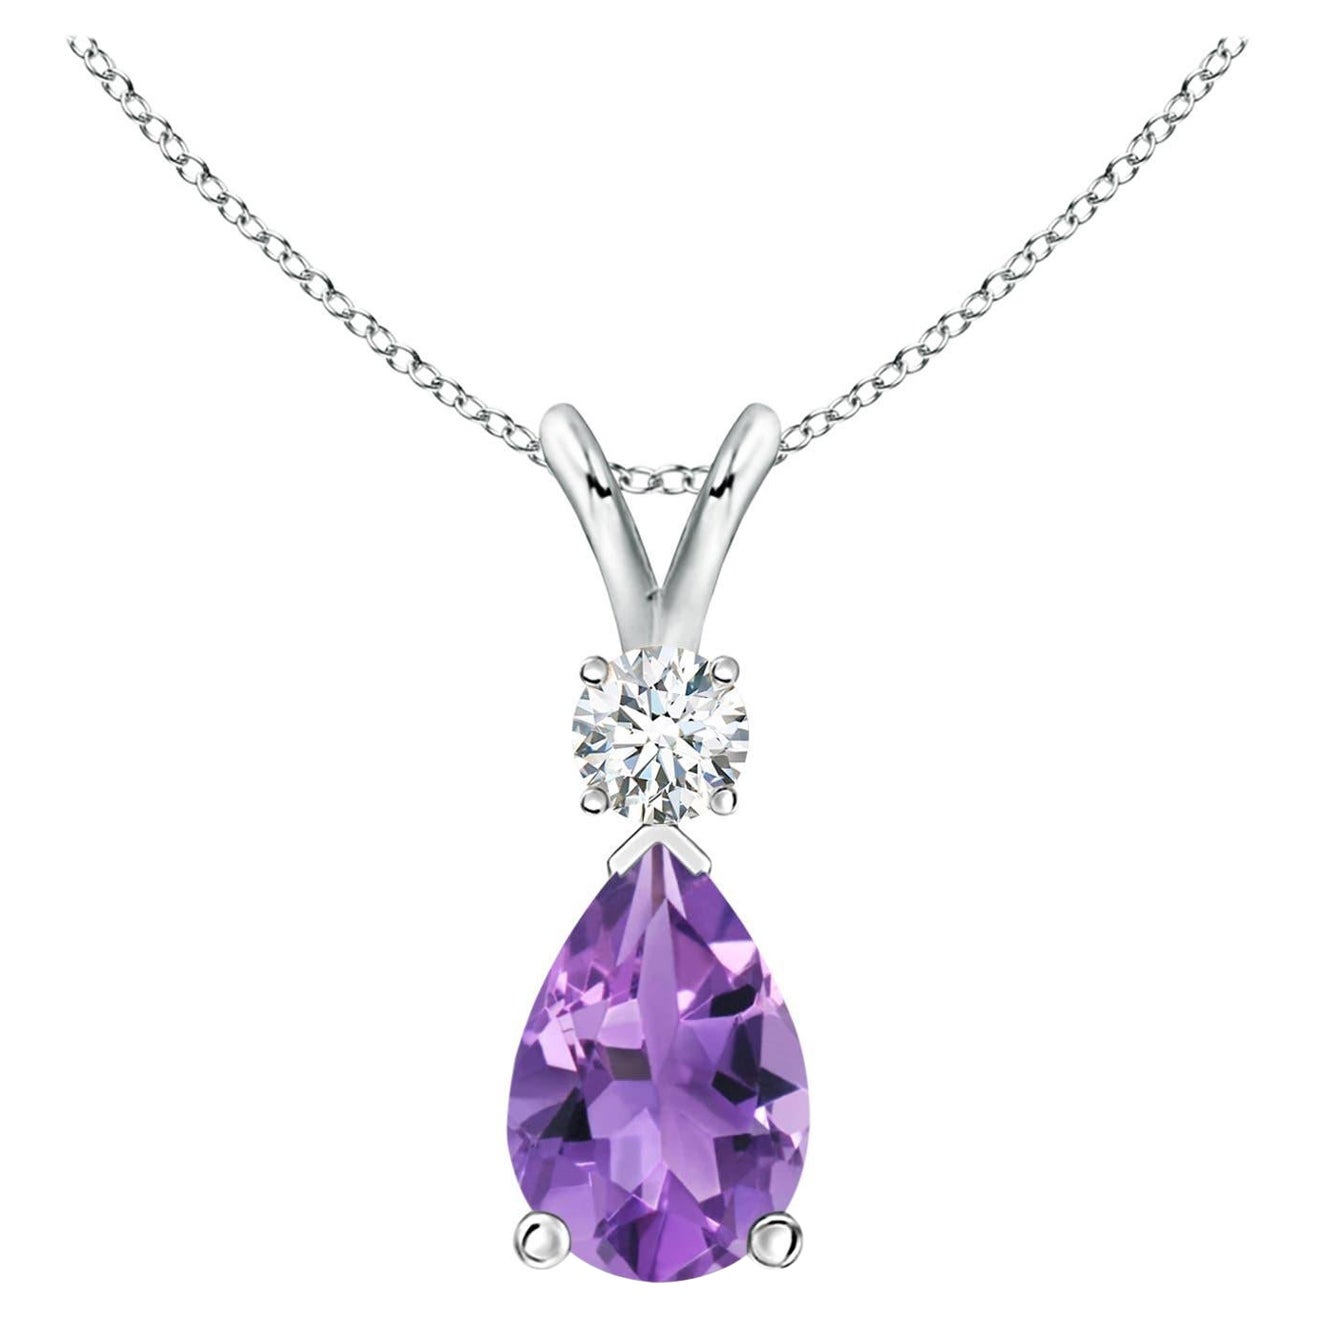 Natural 1.6 ct Amethyst Teardrop Pendant with Diamond in 14K White Gold